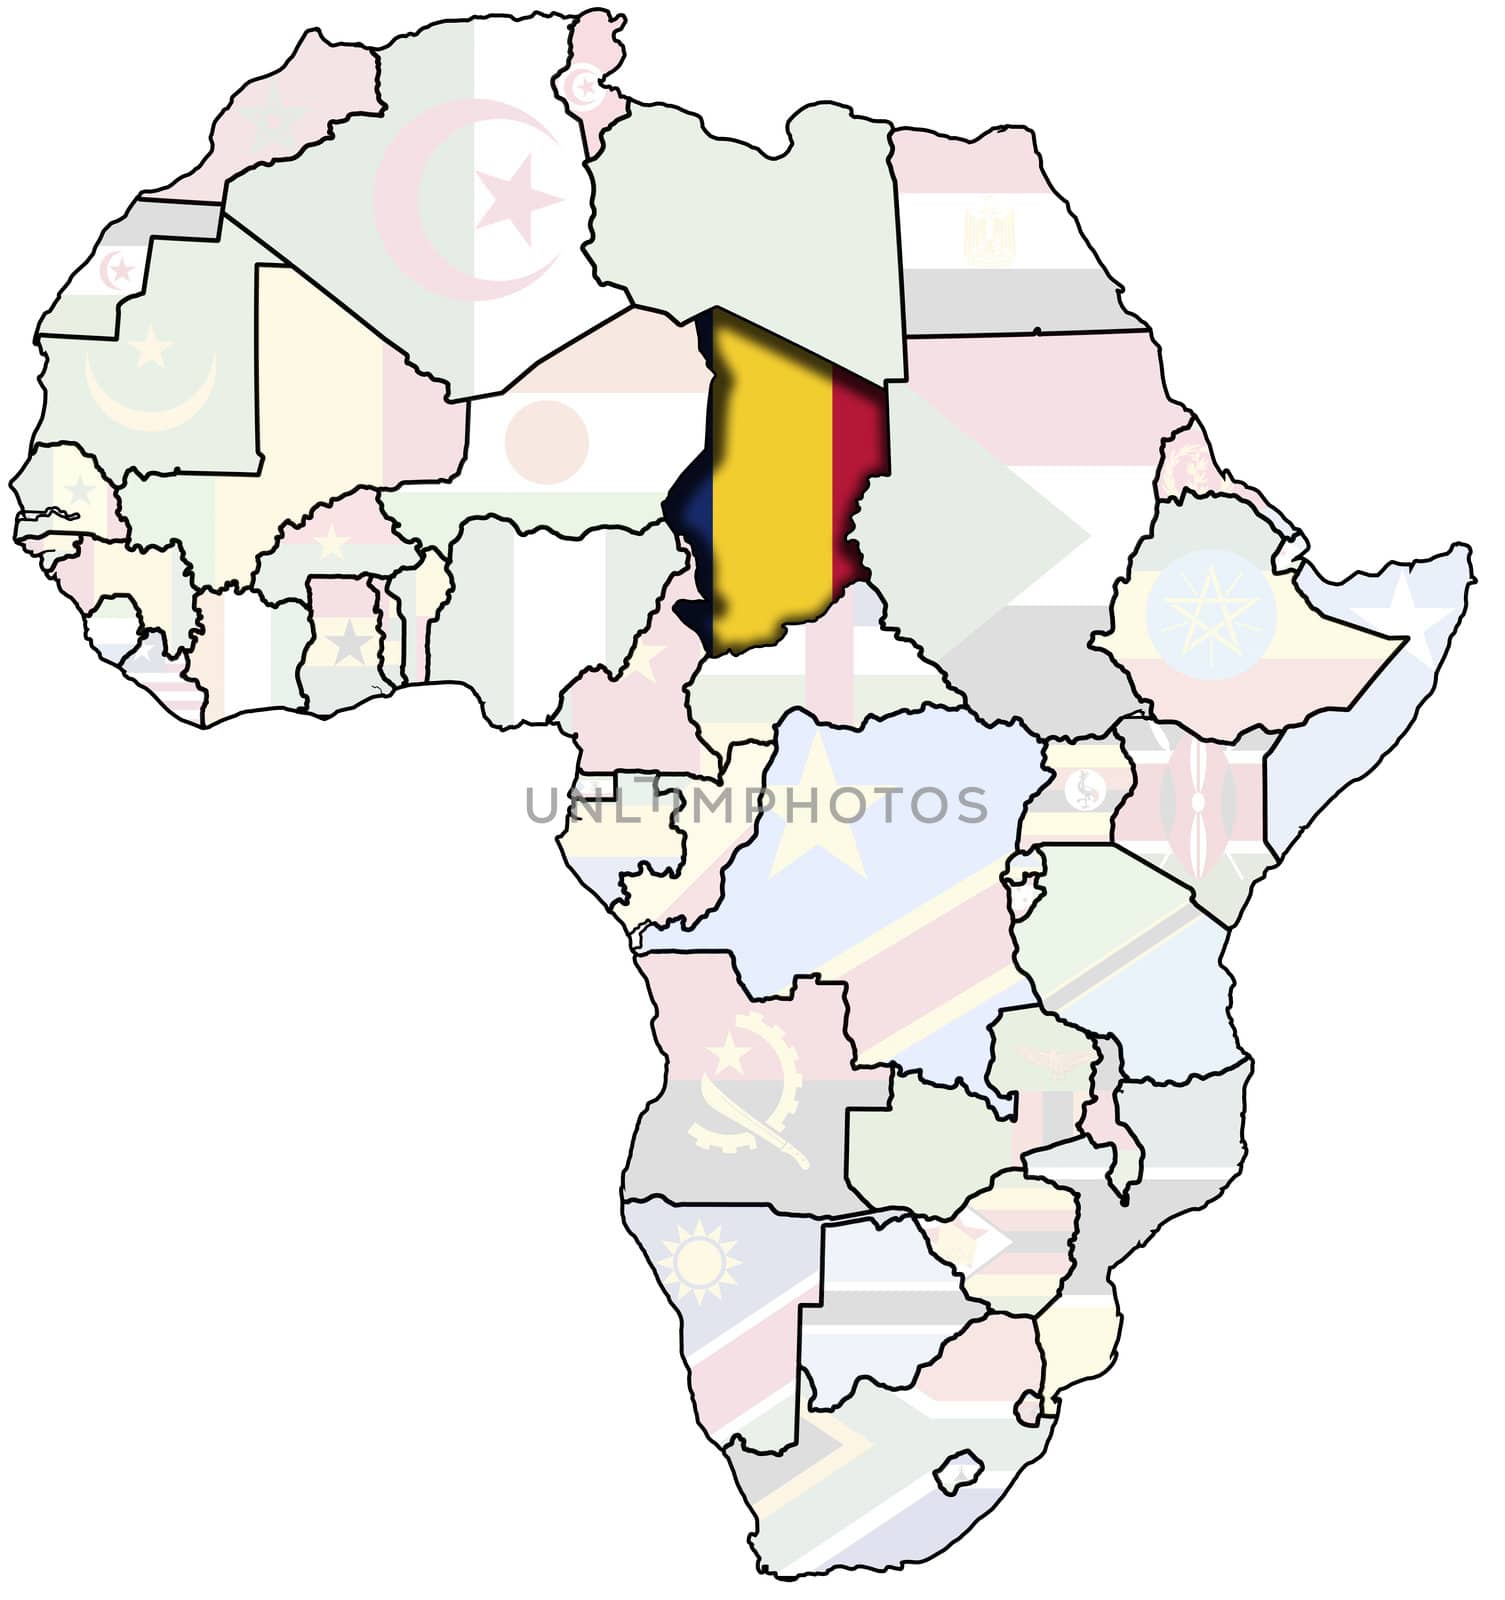 chad on africa map by michal812